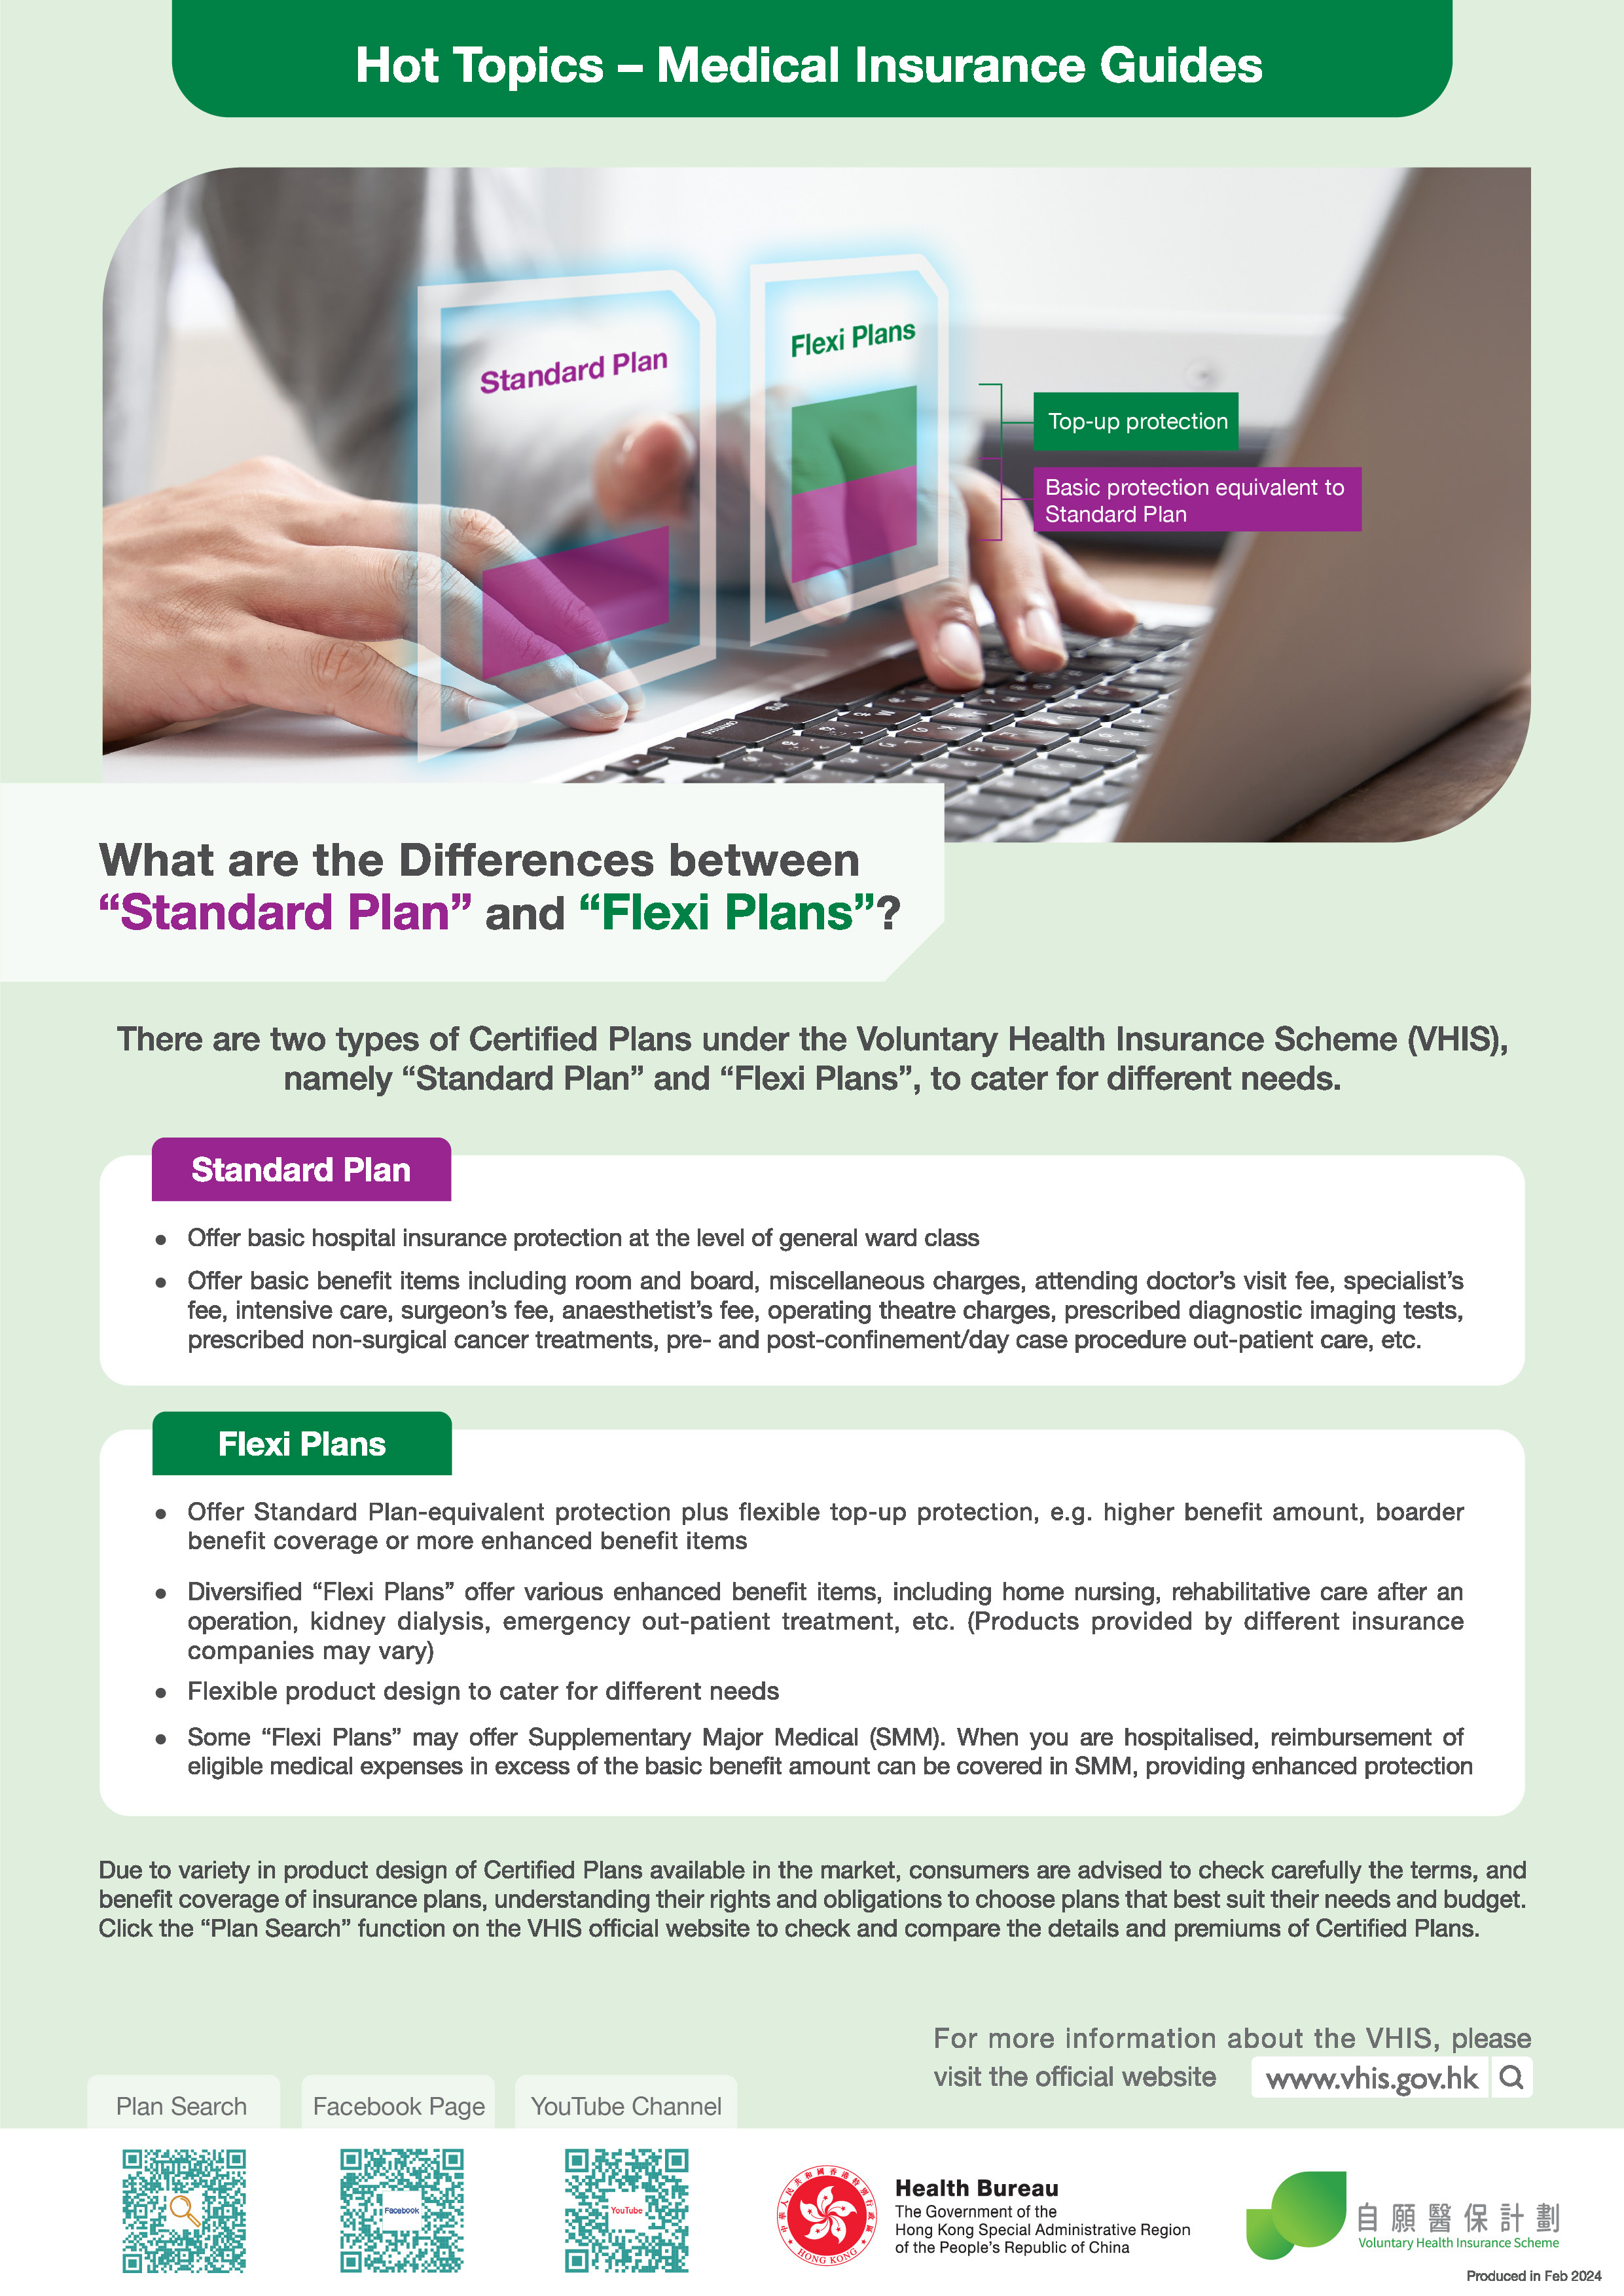 What are the Differences betweenStandard Plan and Flexi Plans?